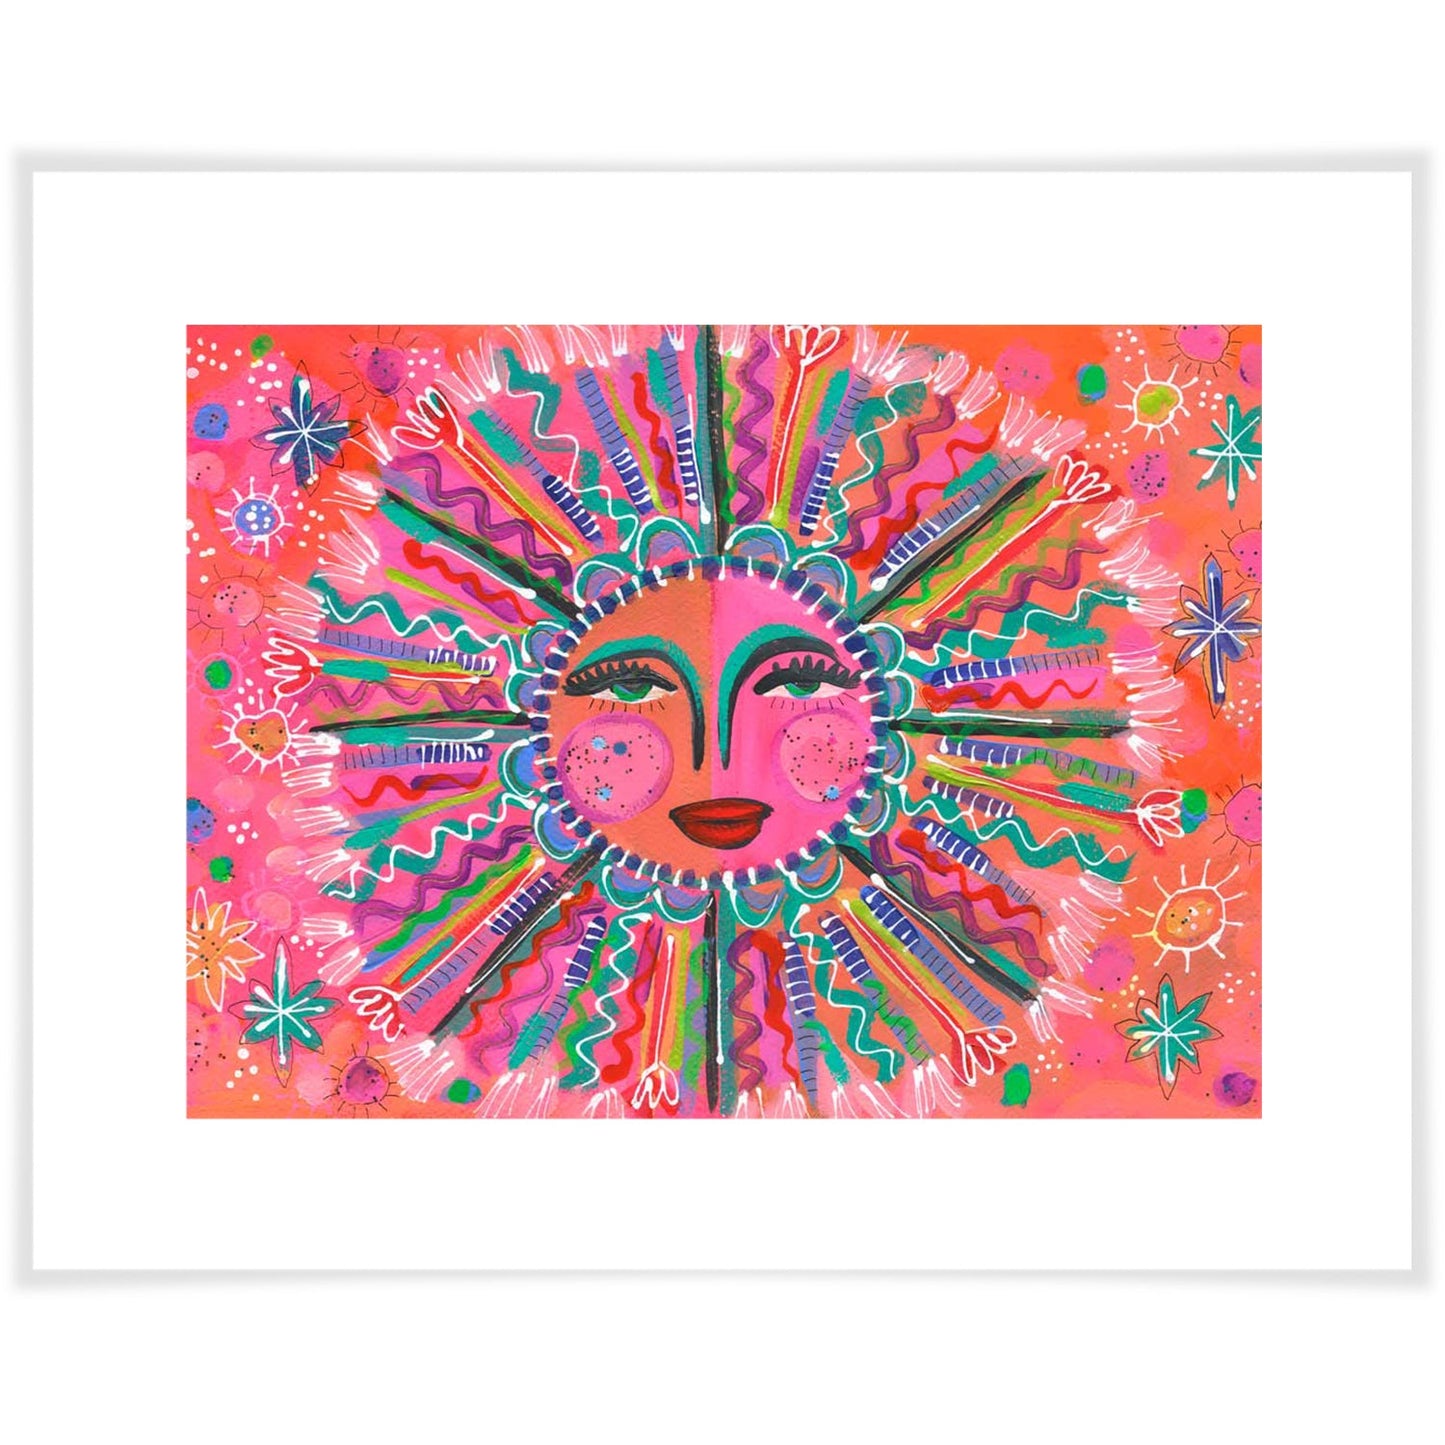 The Warmth Of The Sun Art Prints